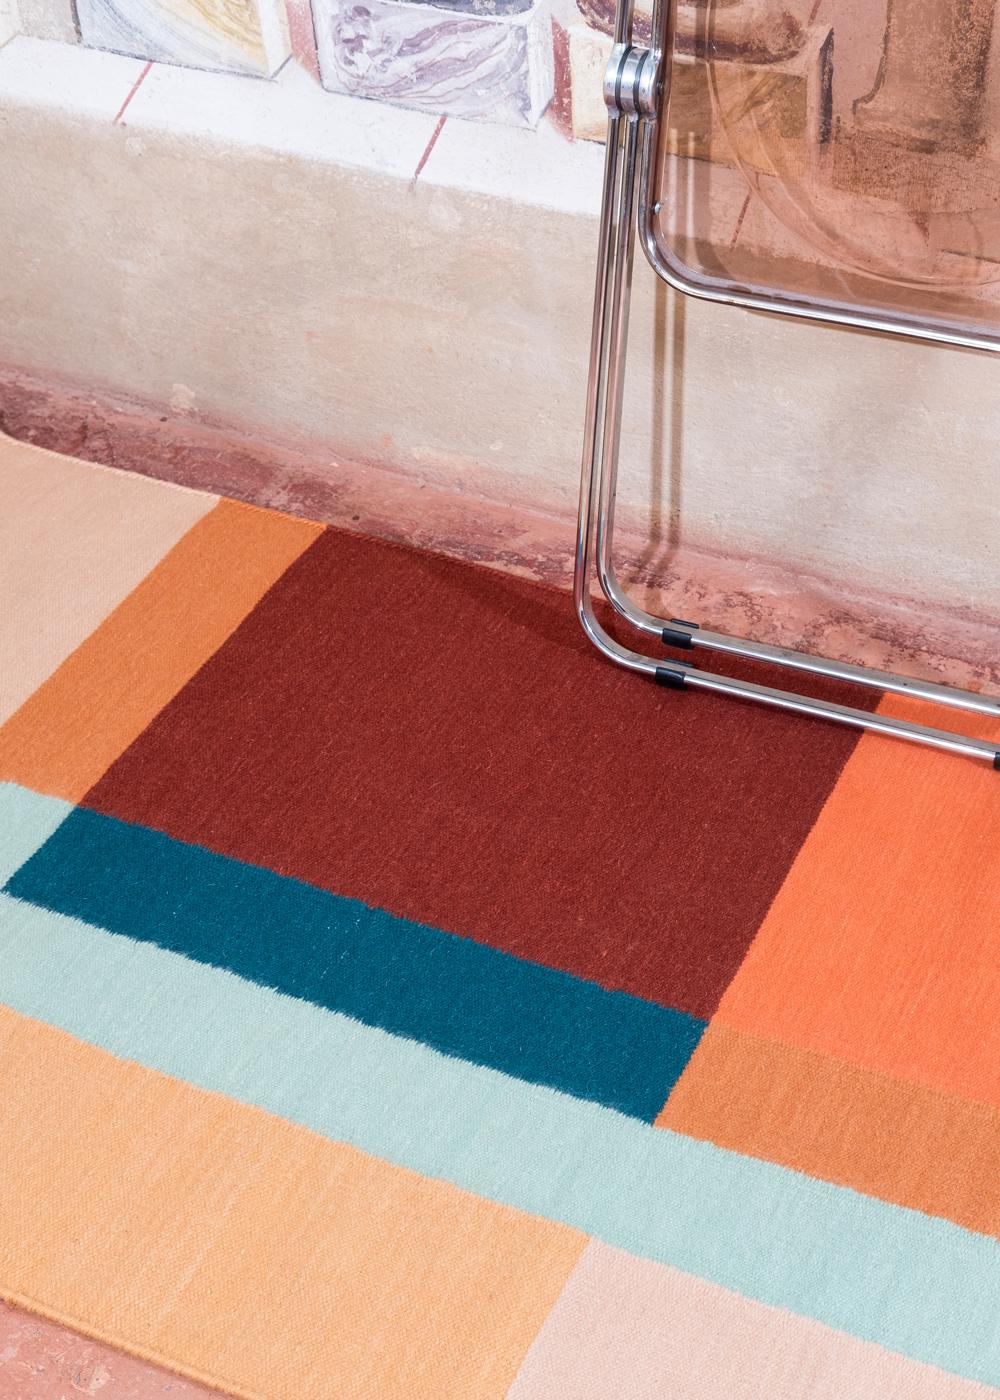 Dune - Design Kilim Rug Liver Studio Milan Wool Carpet Cotton Handwoven

This Rugs is designed by Liver, a creative studio based in Milan, Italy. Composed from a geometrical grid, colours overlap and combine with vibrancy.

handmade in India,